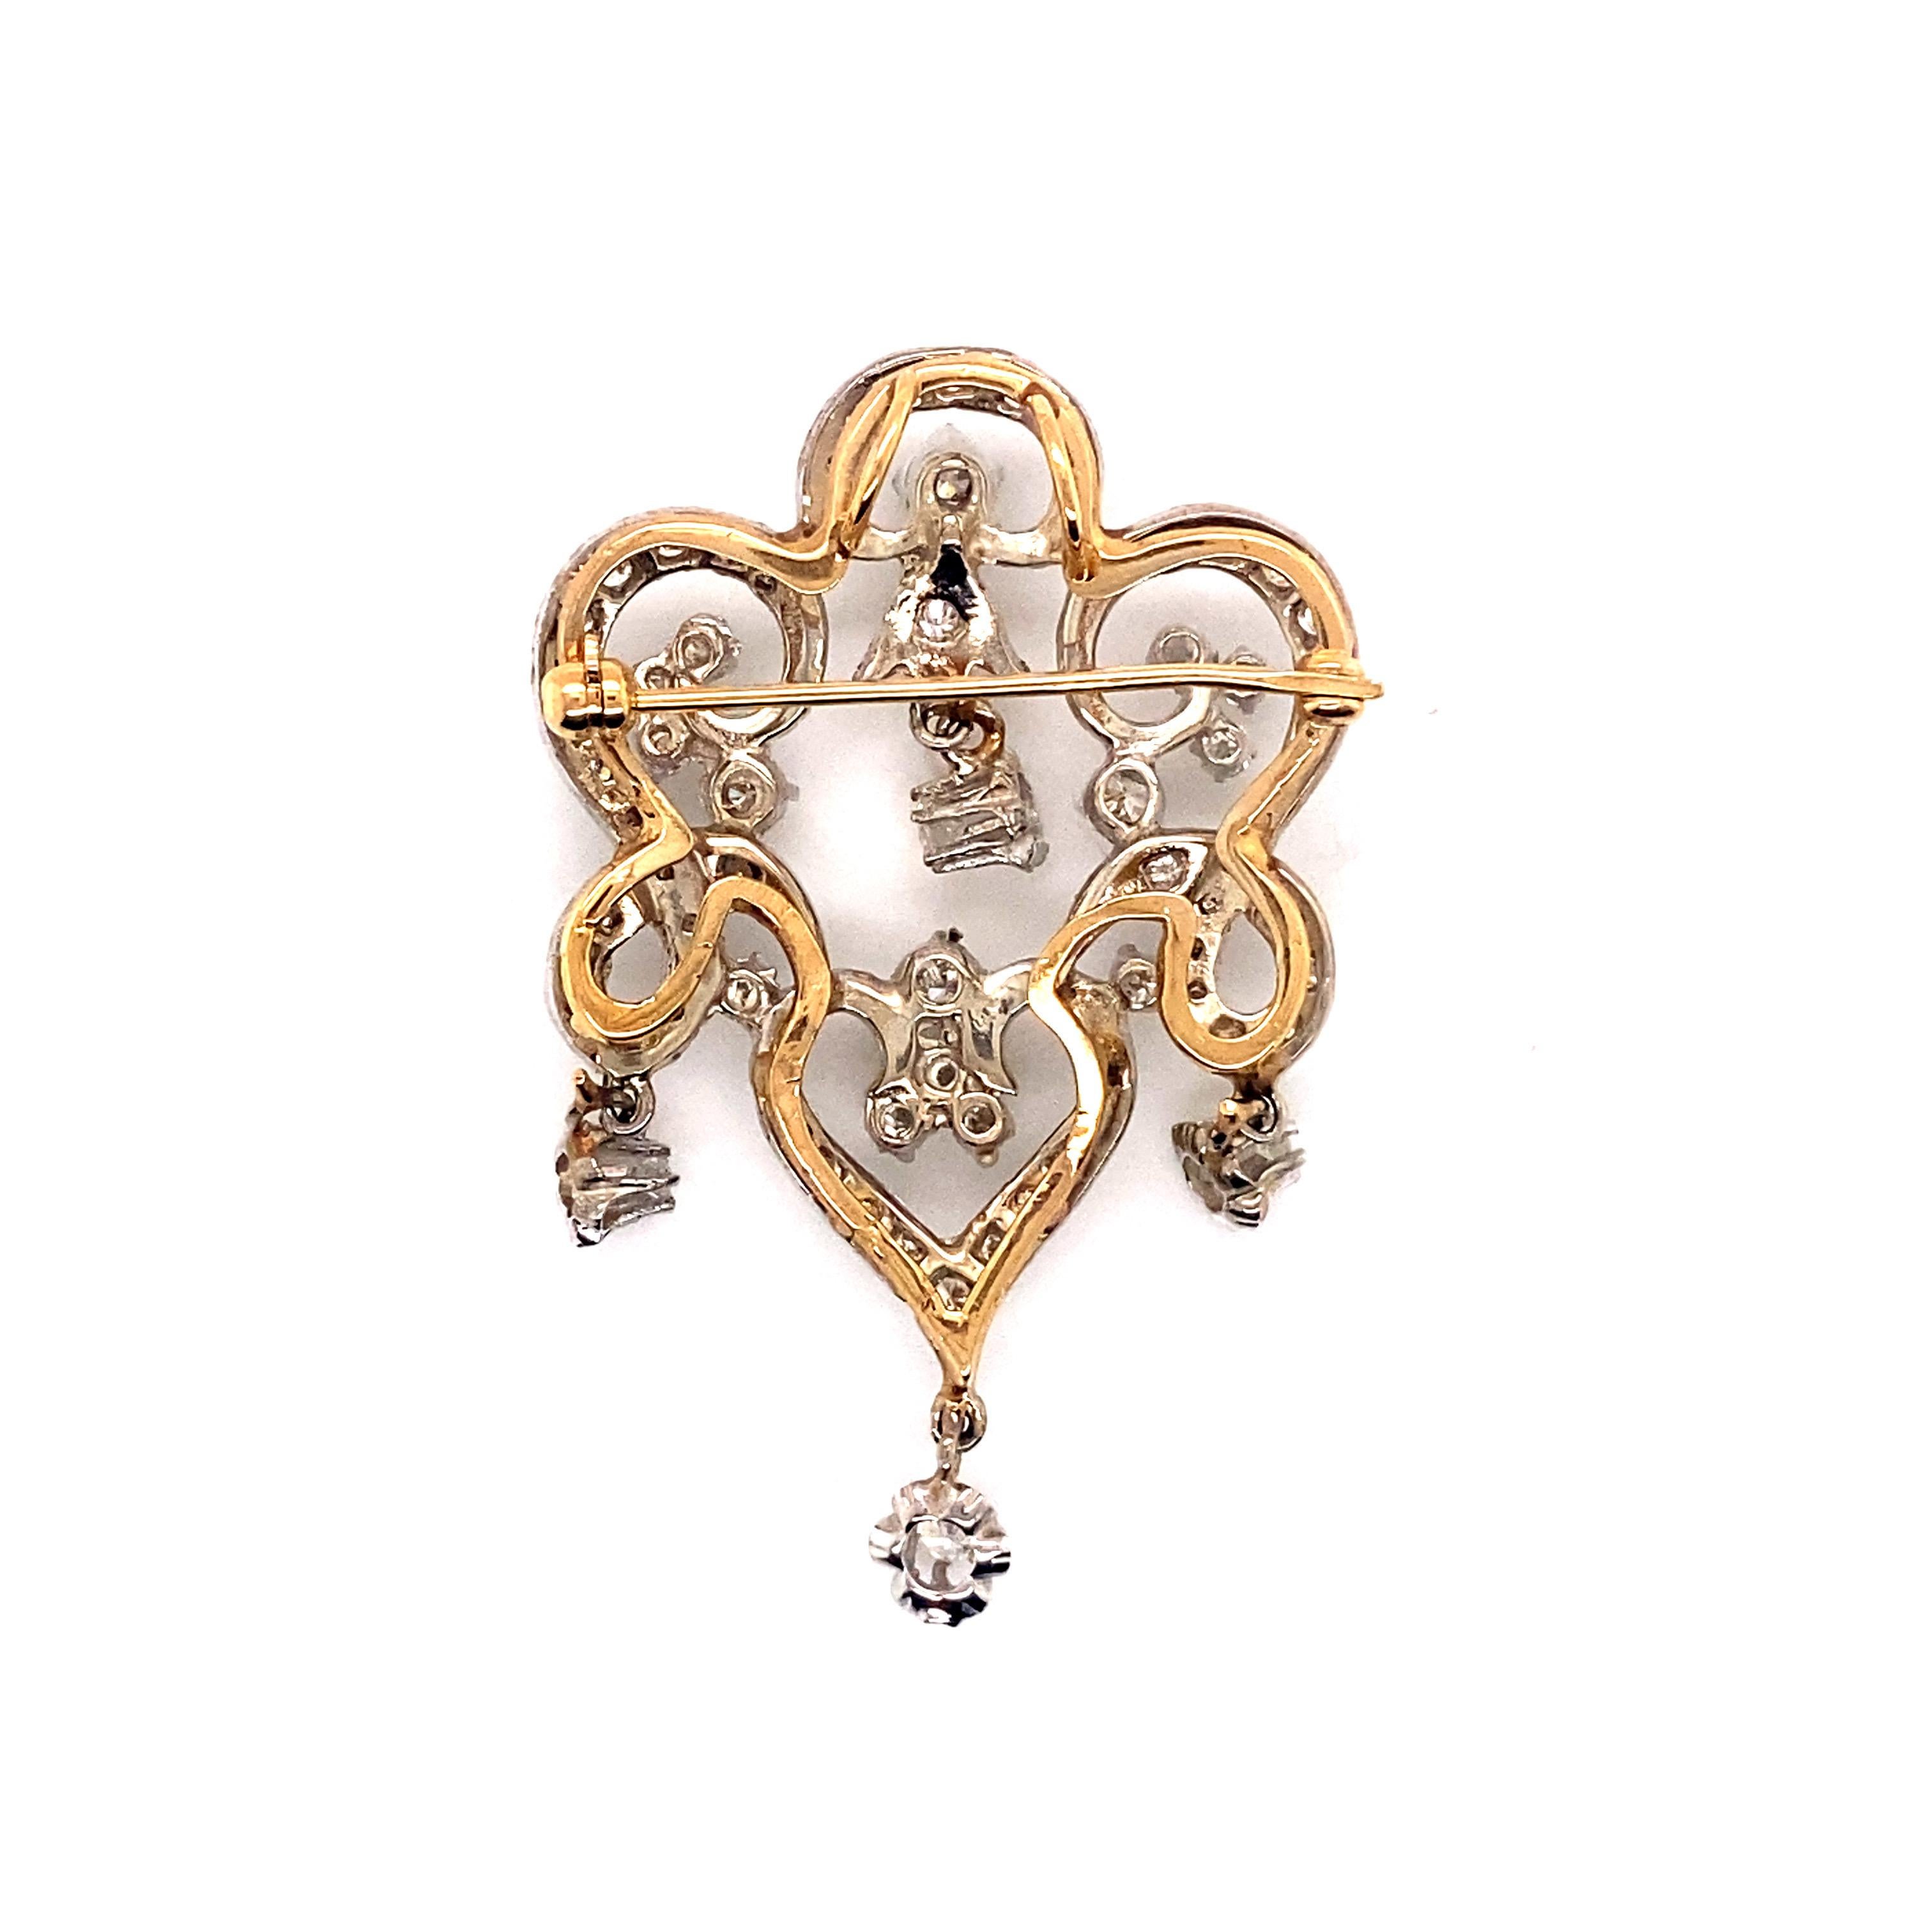 Vintage 1950’s Edwardian Reproduction Diamond Chandelier Brooch and Pendant In Good Condition For Sale In Boston, MA